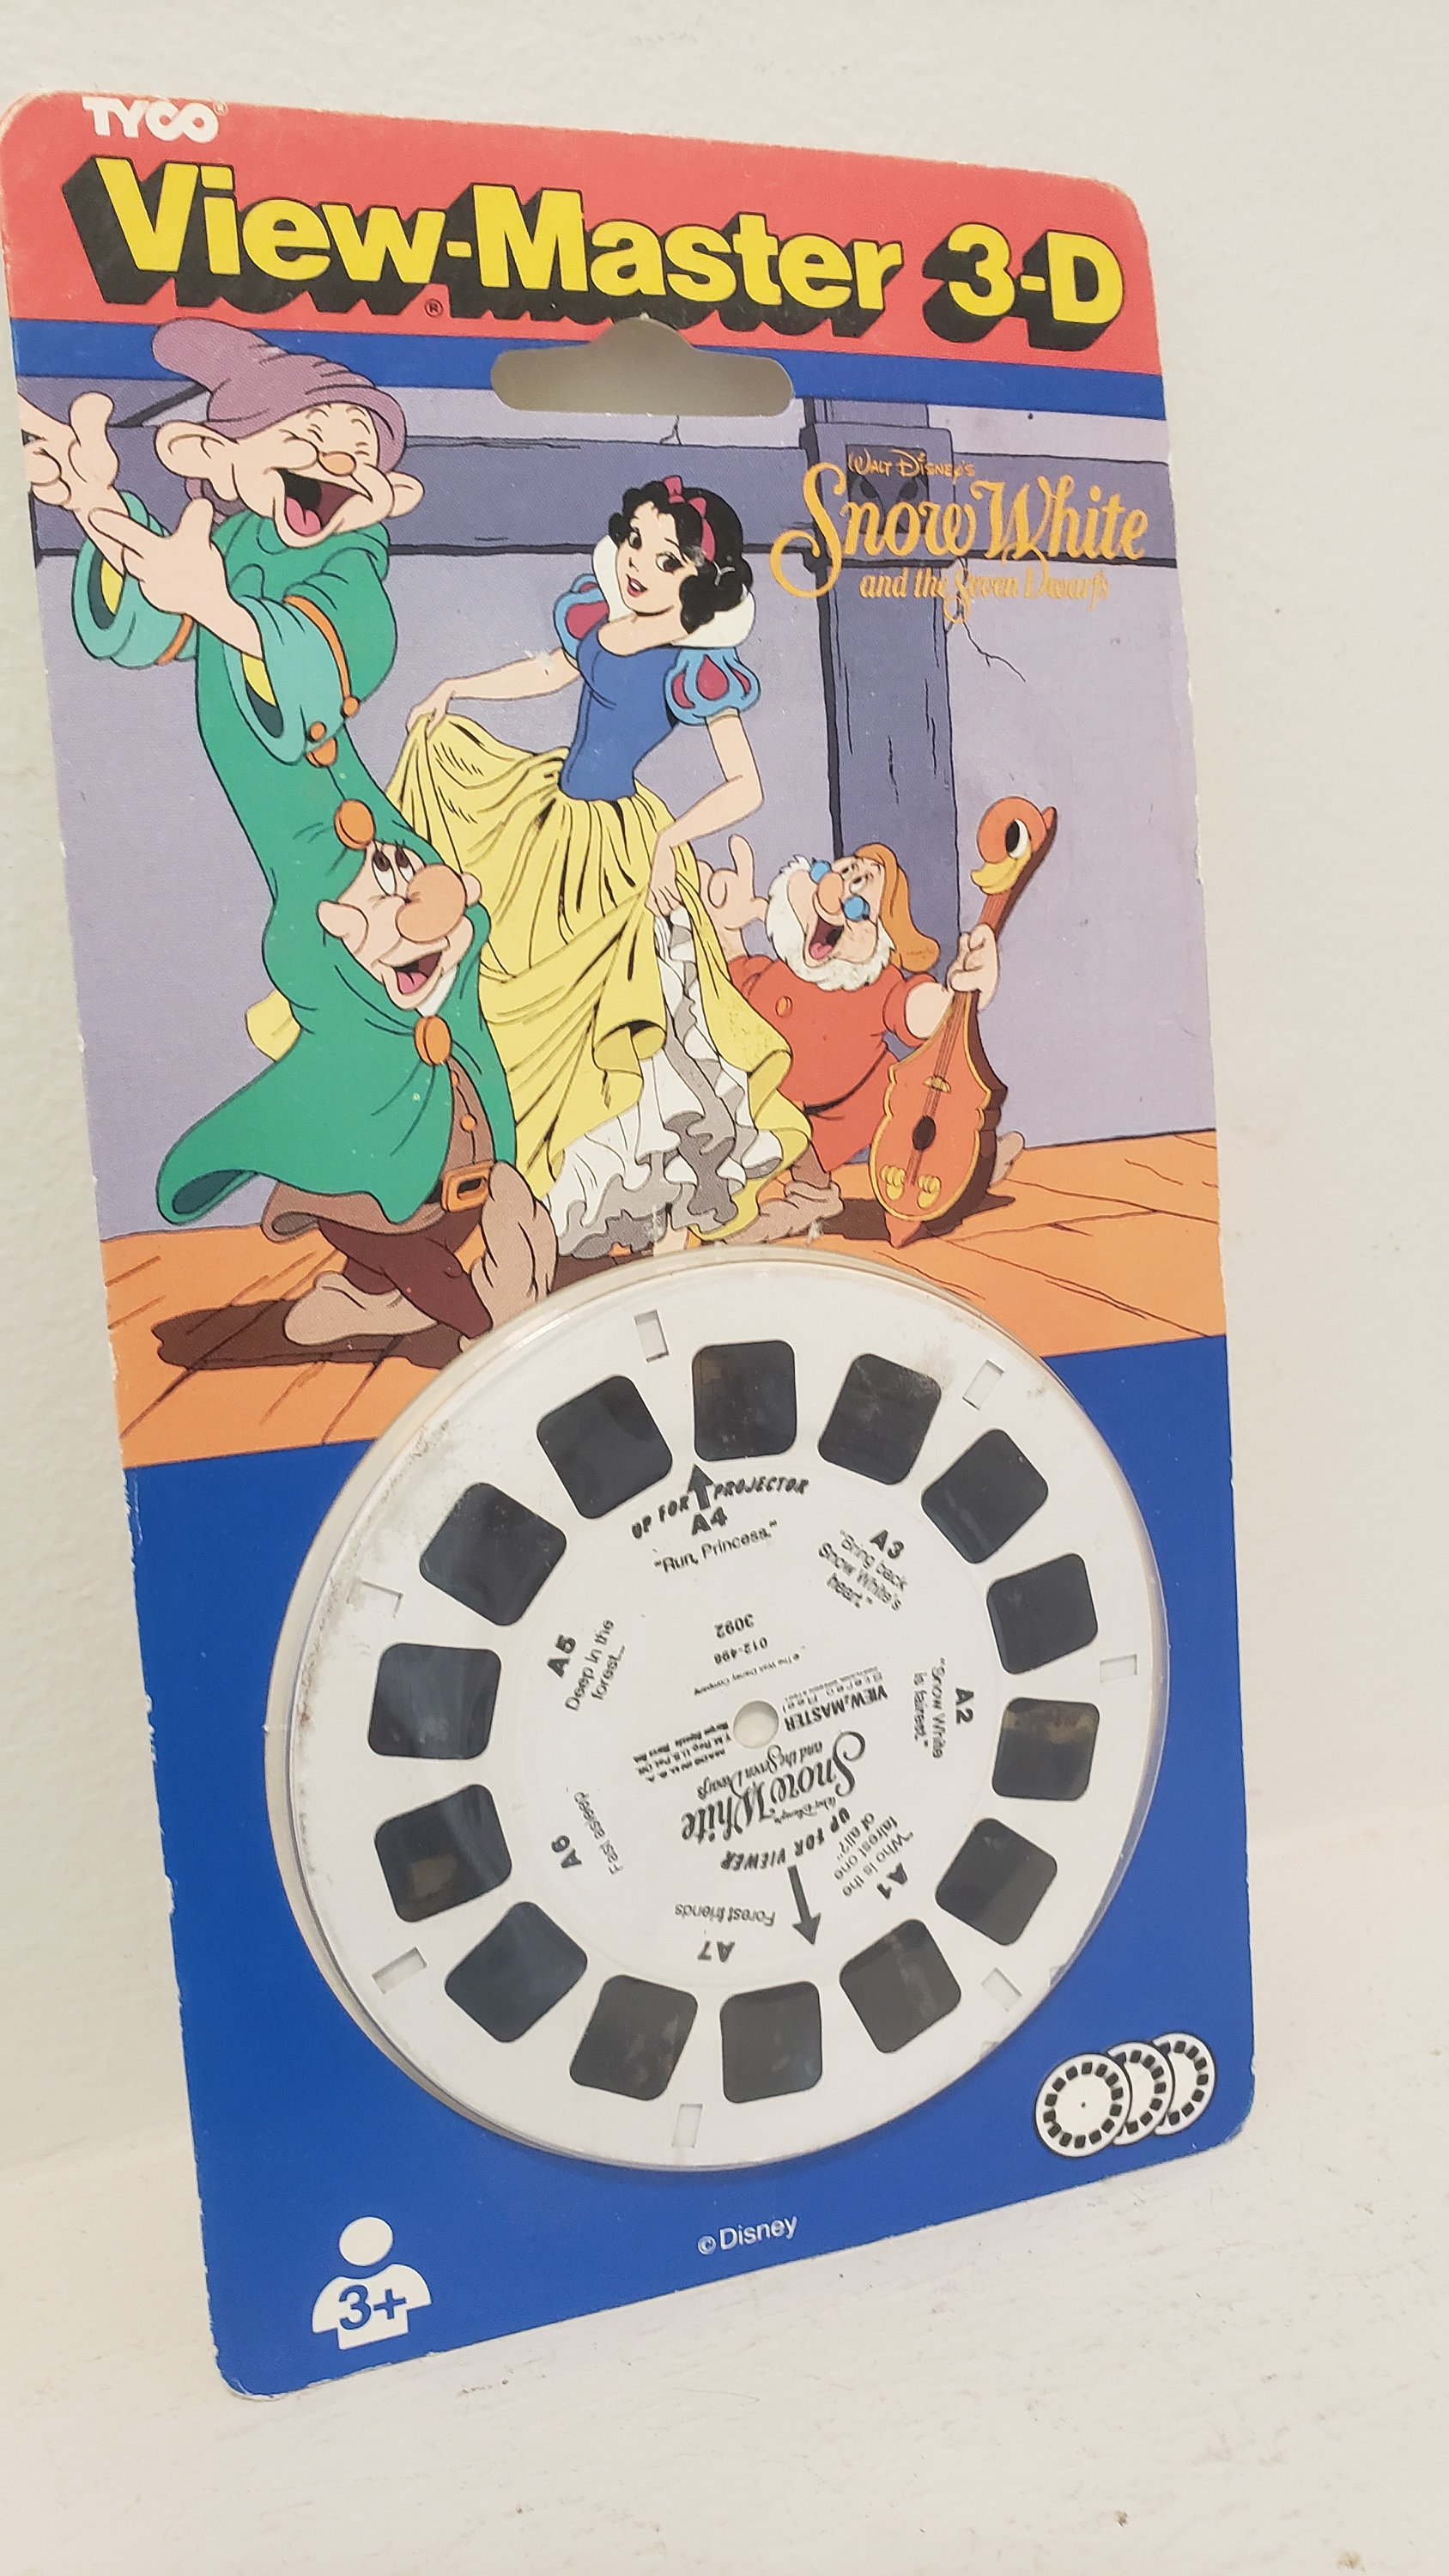 Vintage Tyco View Master 3-D Reel Set Snow White and the Seven Dwarfs 90s -   Israel